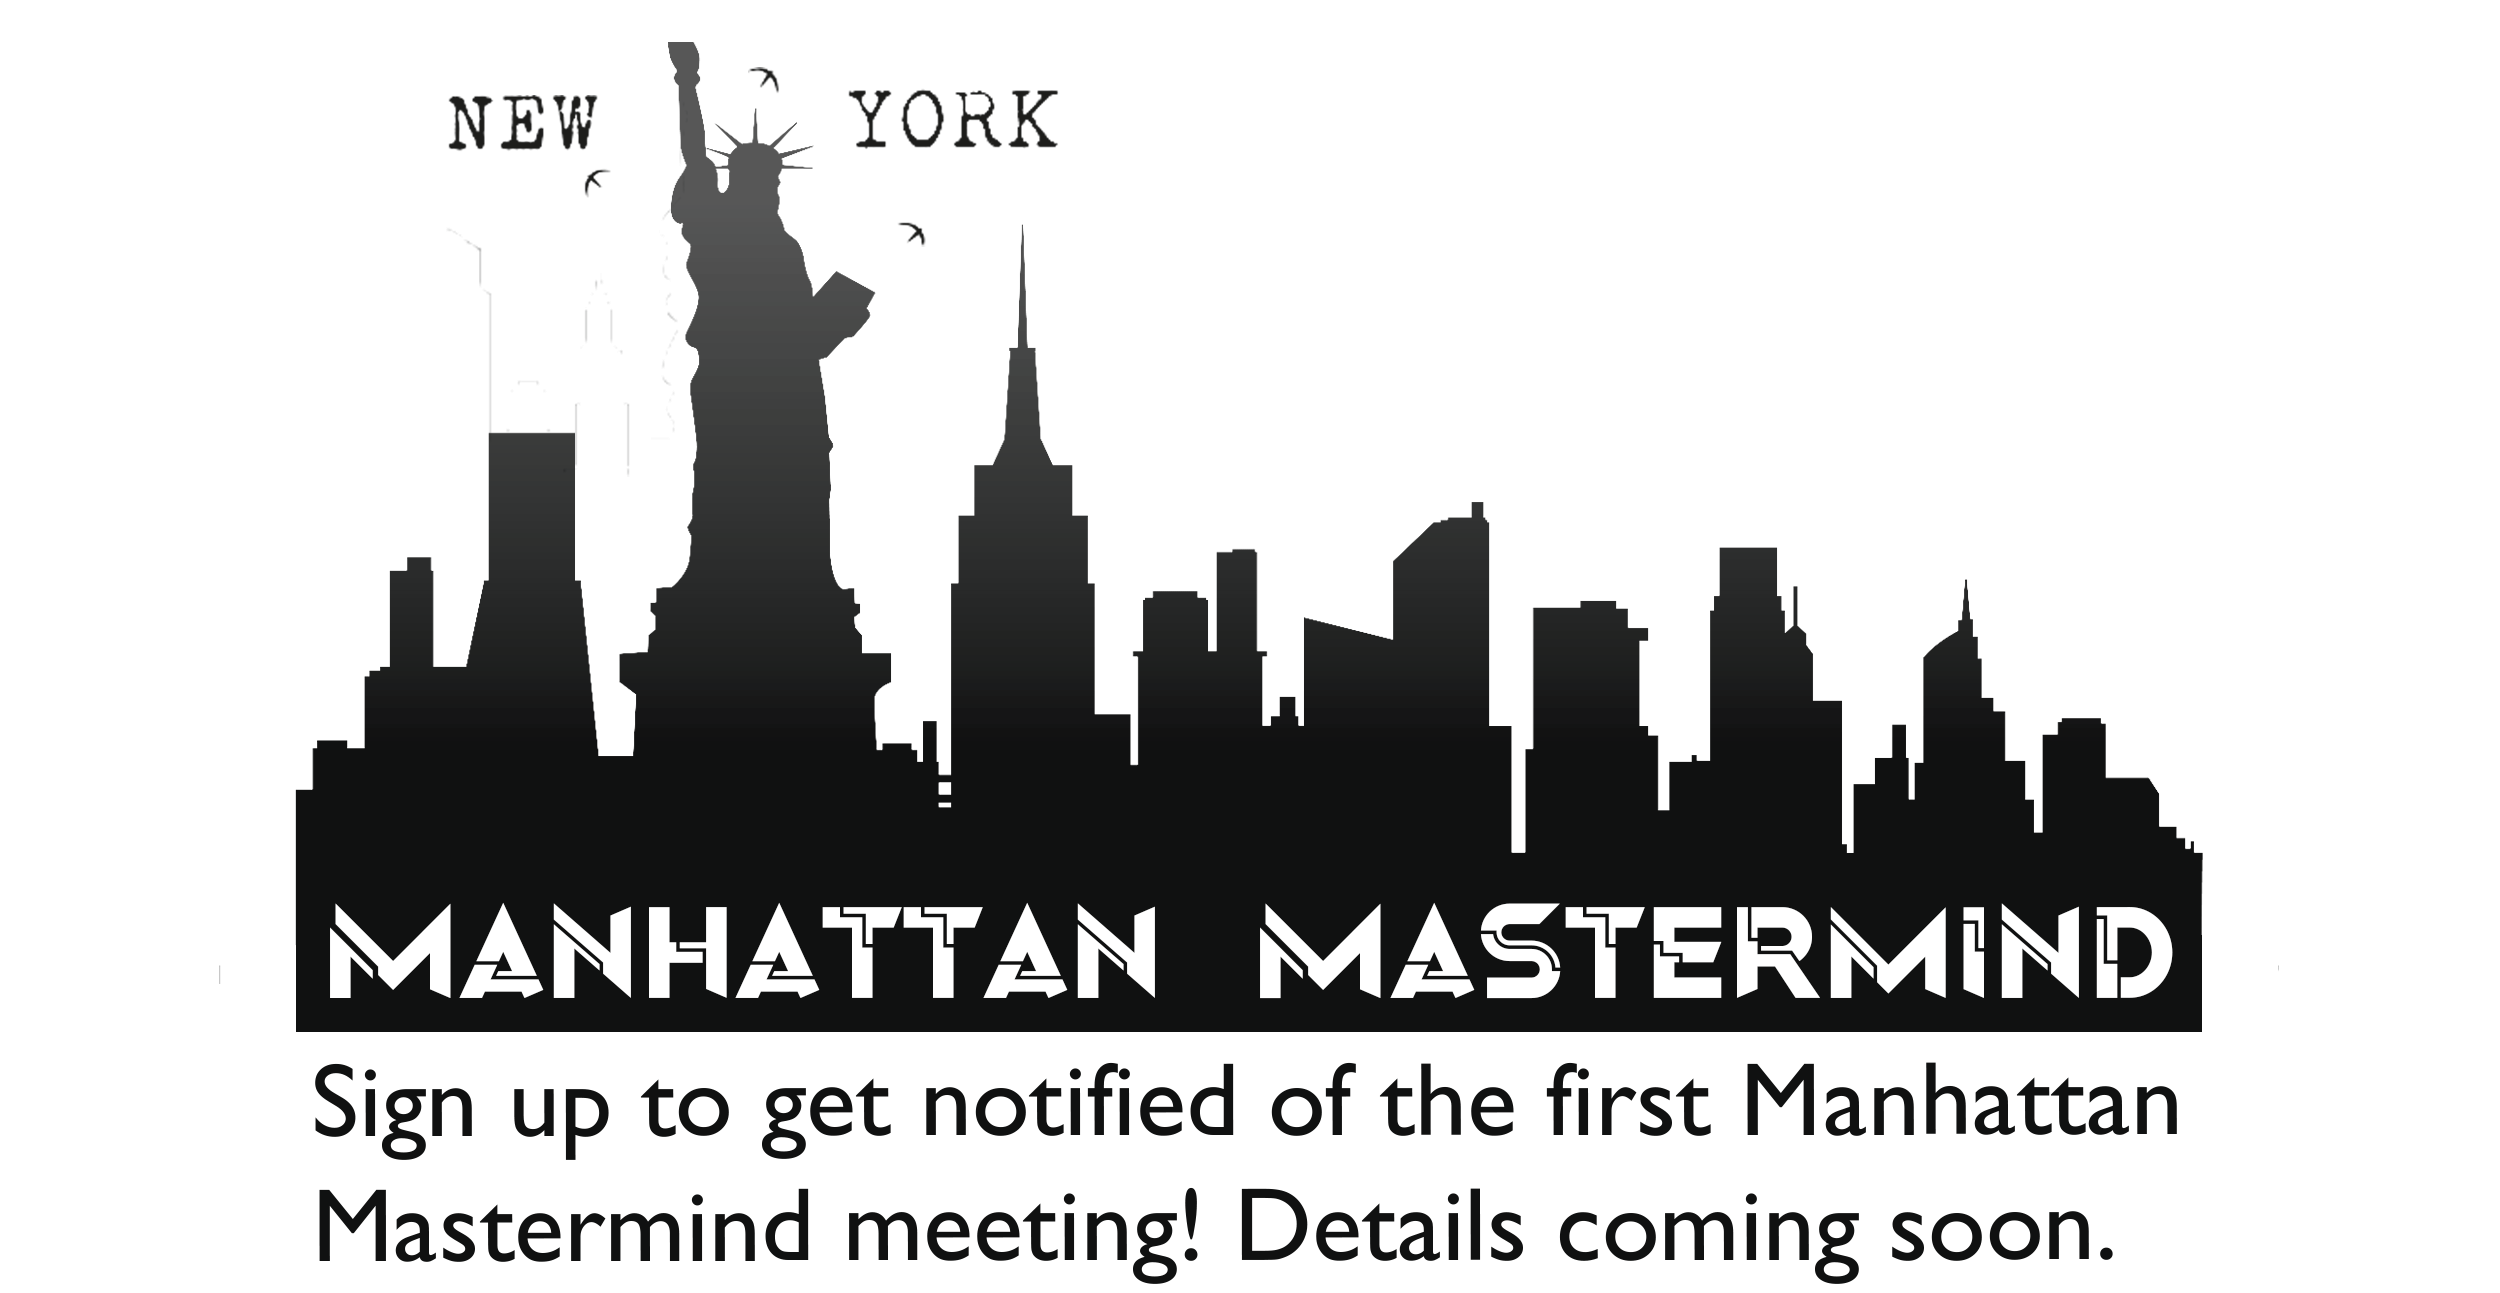 Sign up to get notified of the first Manhattan Mastermind meeting! Details coming soon.